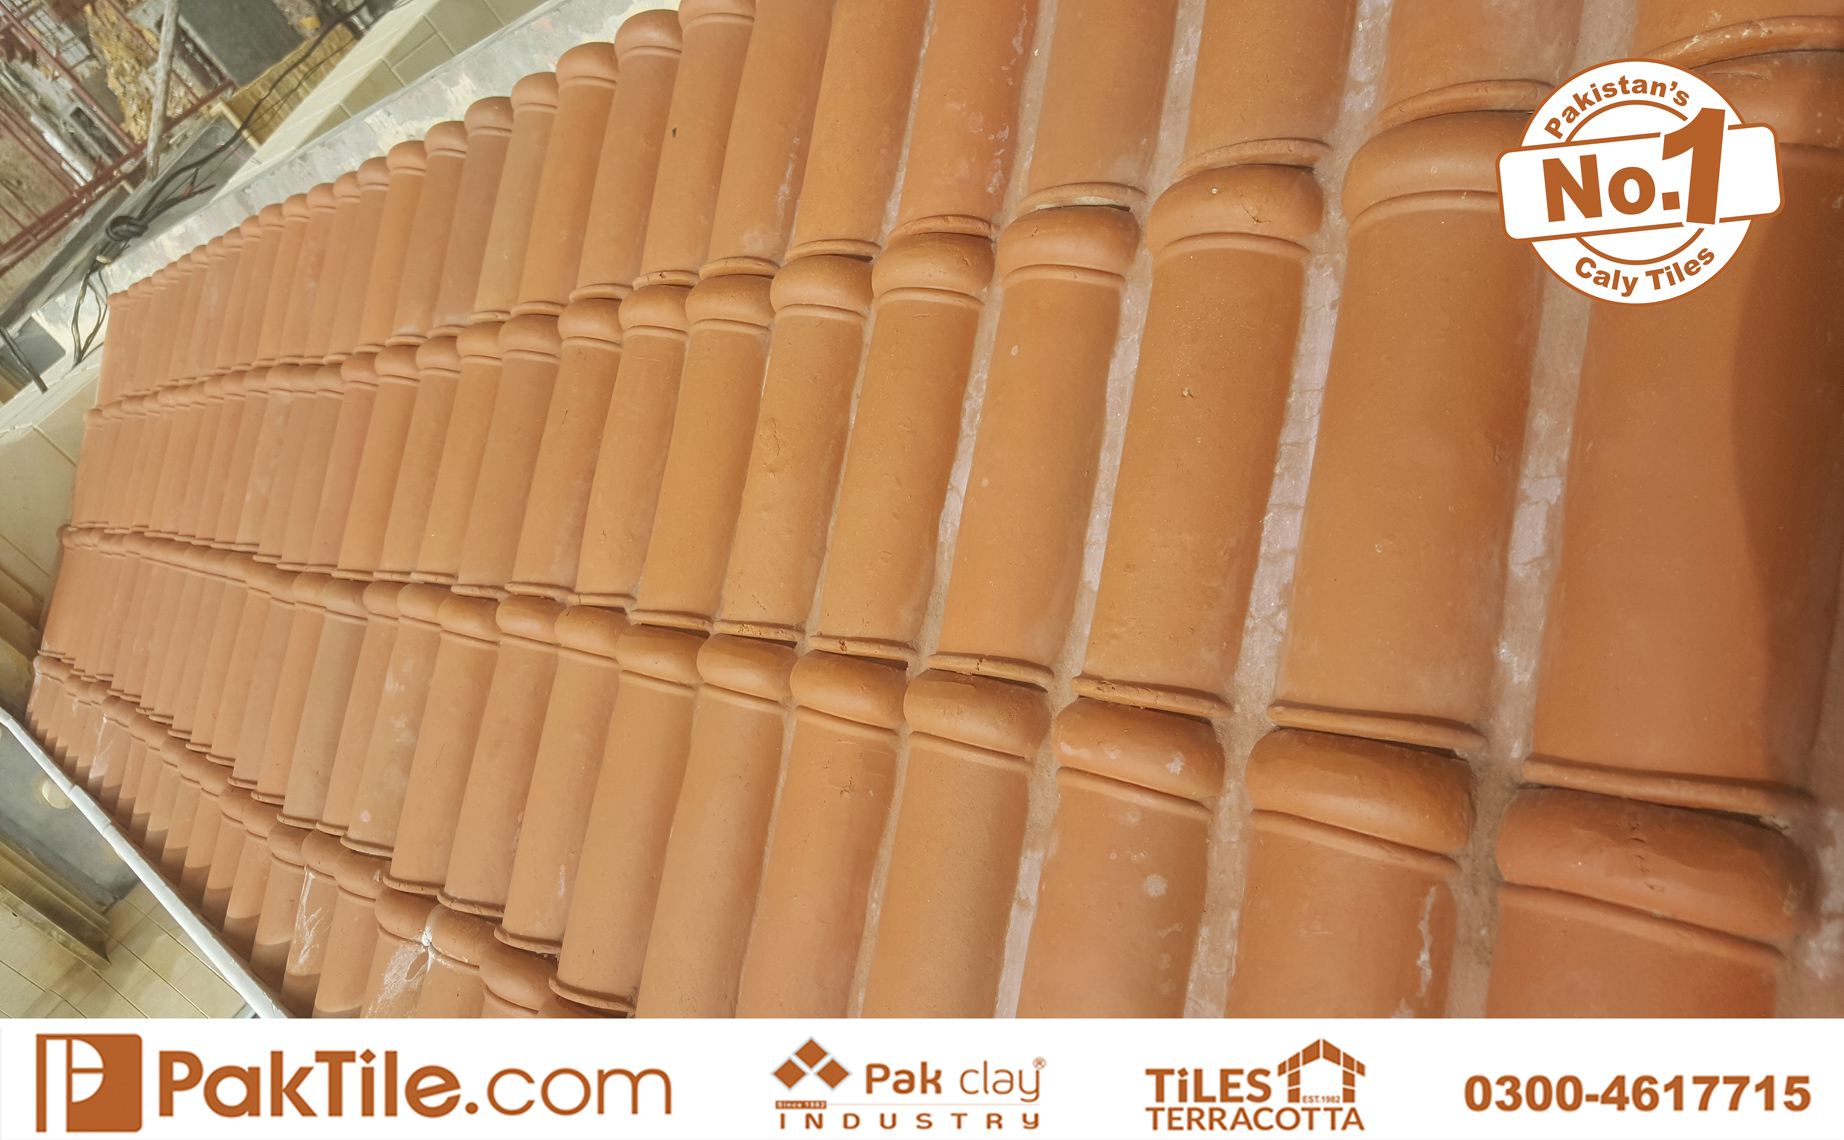 1 Slope Roof Shed Terracotta Pak Clay Khaprail Tiles Pattern Design Size in Lahore Pakistan Images